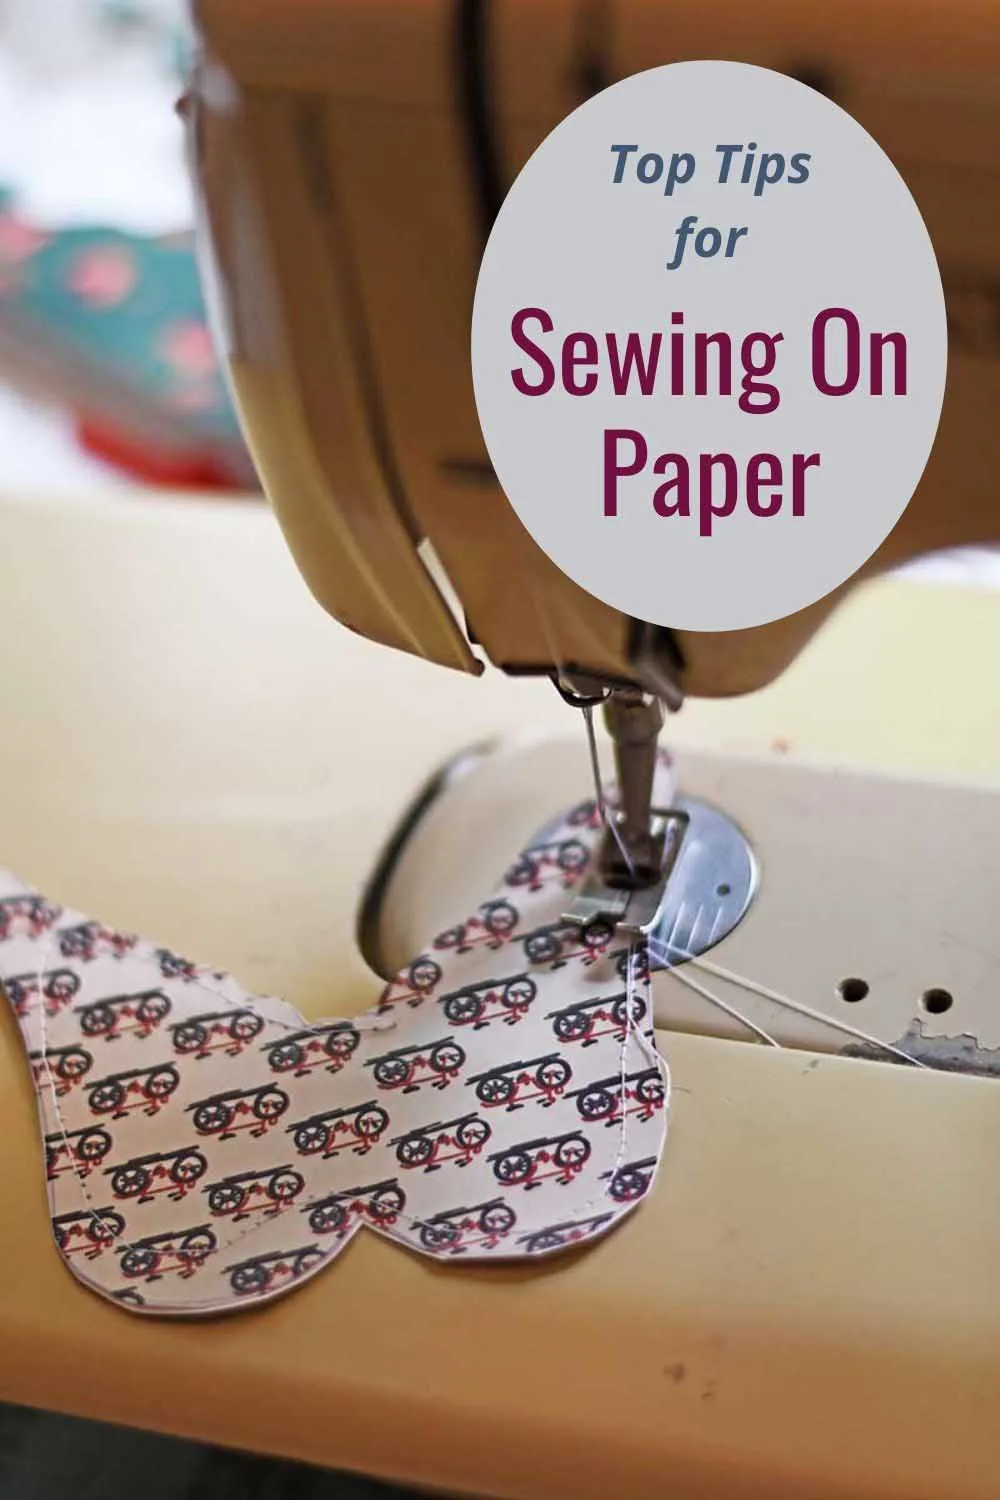 How to Finish Sewing on a Mini Sewing Machine, How to Stop Sewing